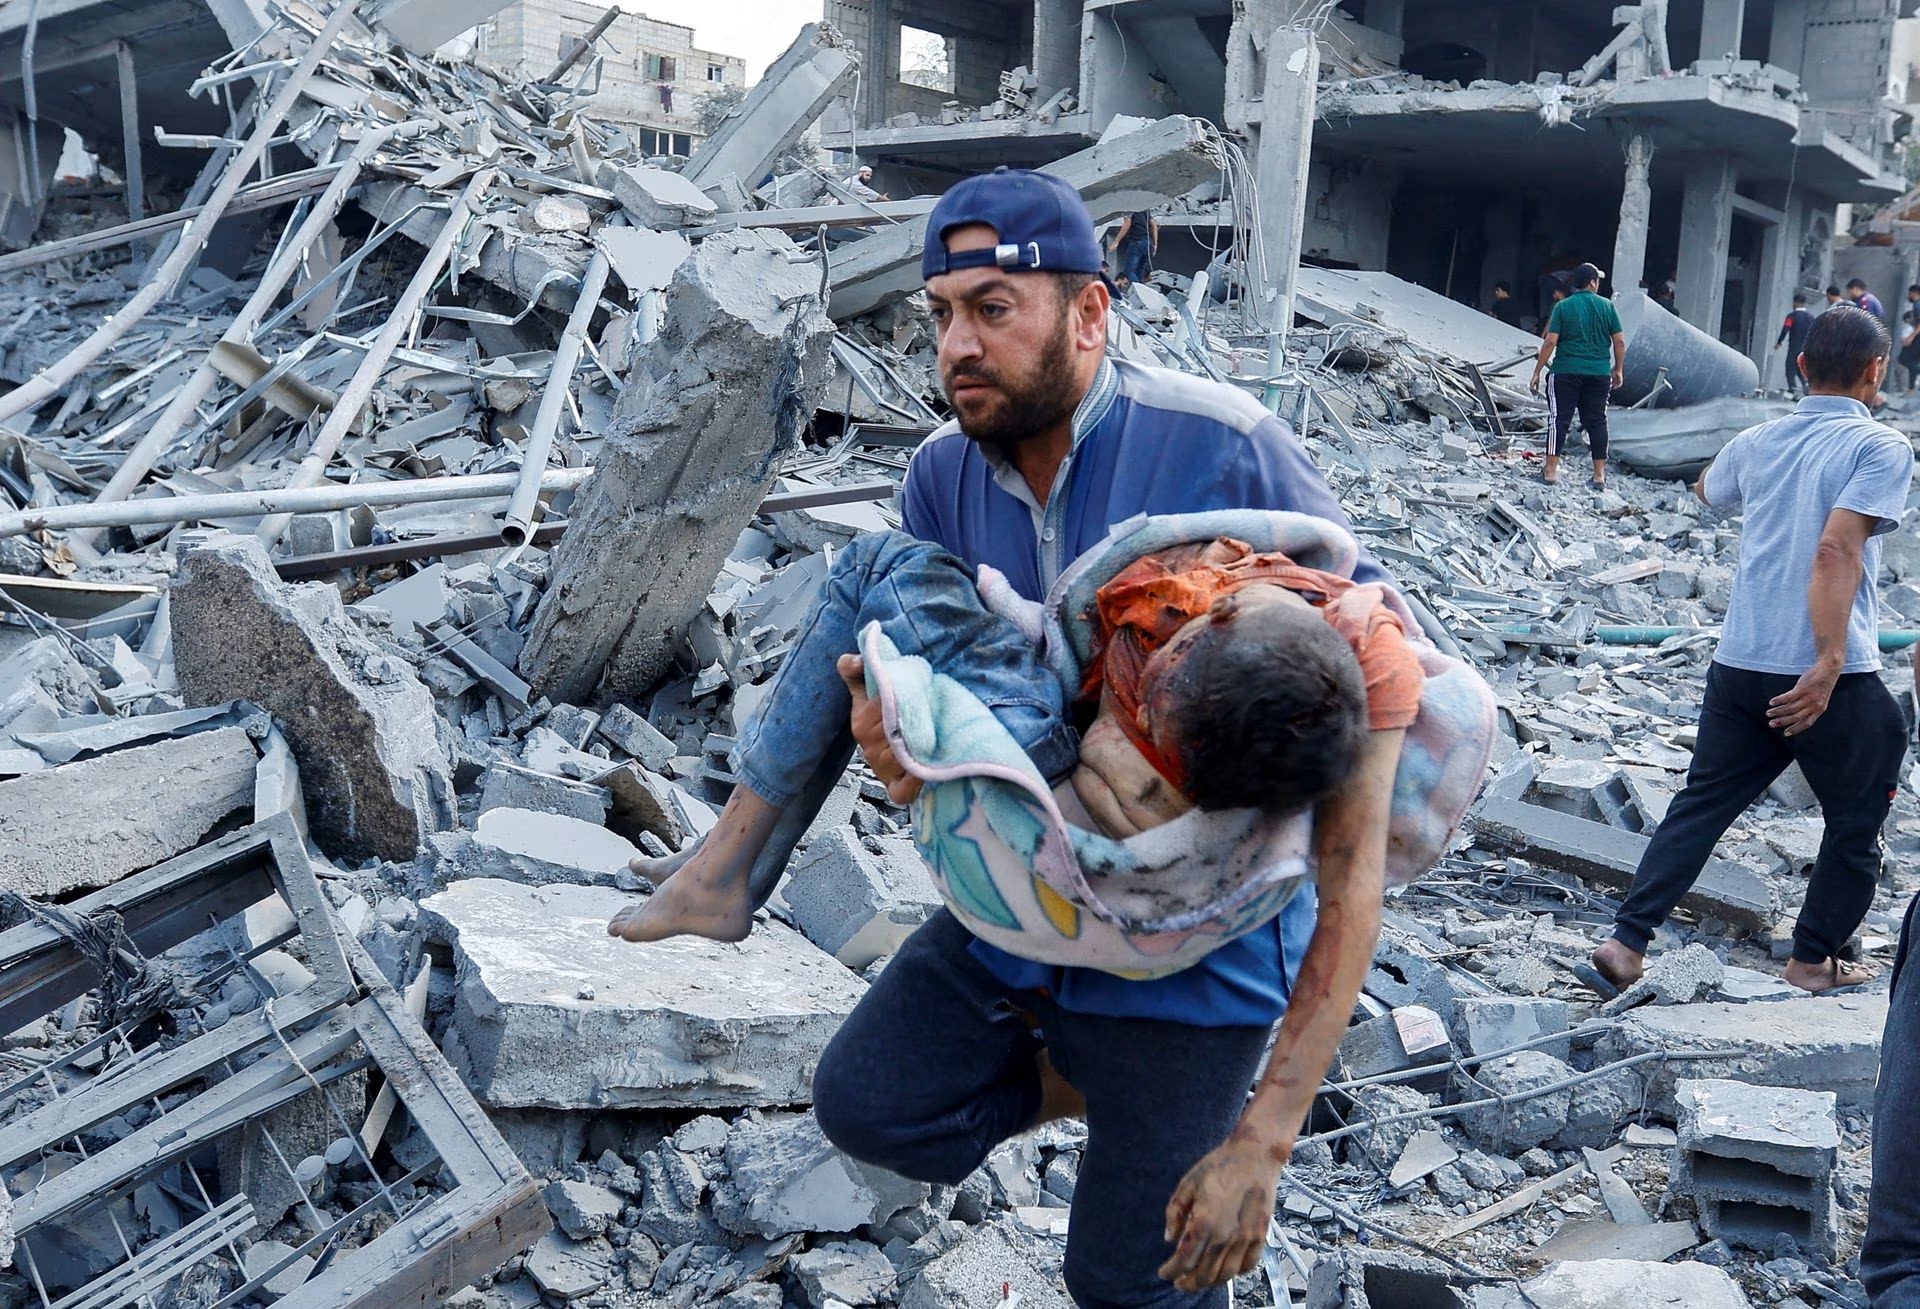 A Palestinian man carries a child casualty following Israeli strikes on houses in Rafah in the southern Gaza Strip, October 17.